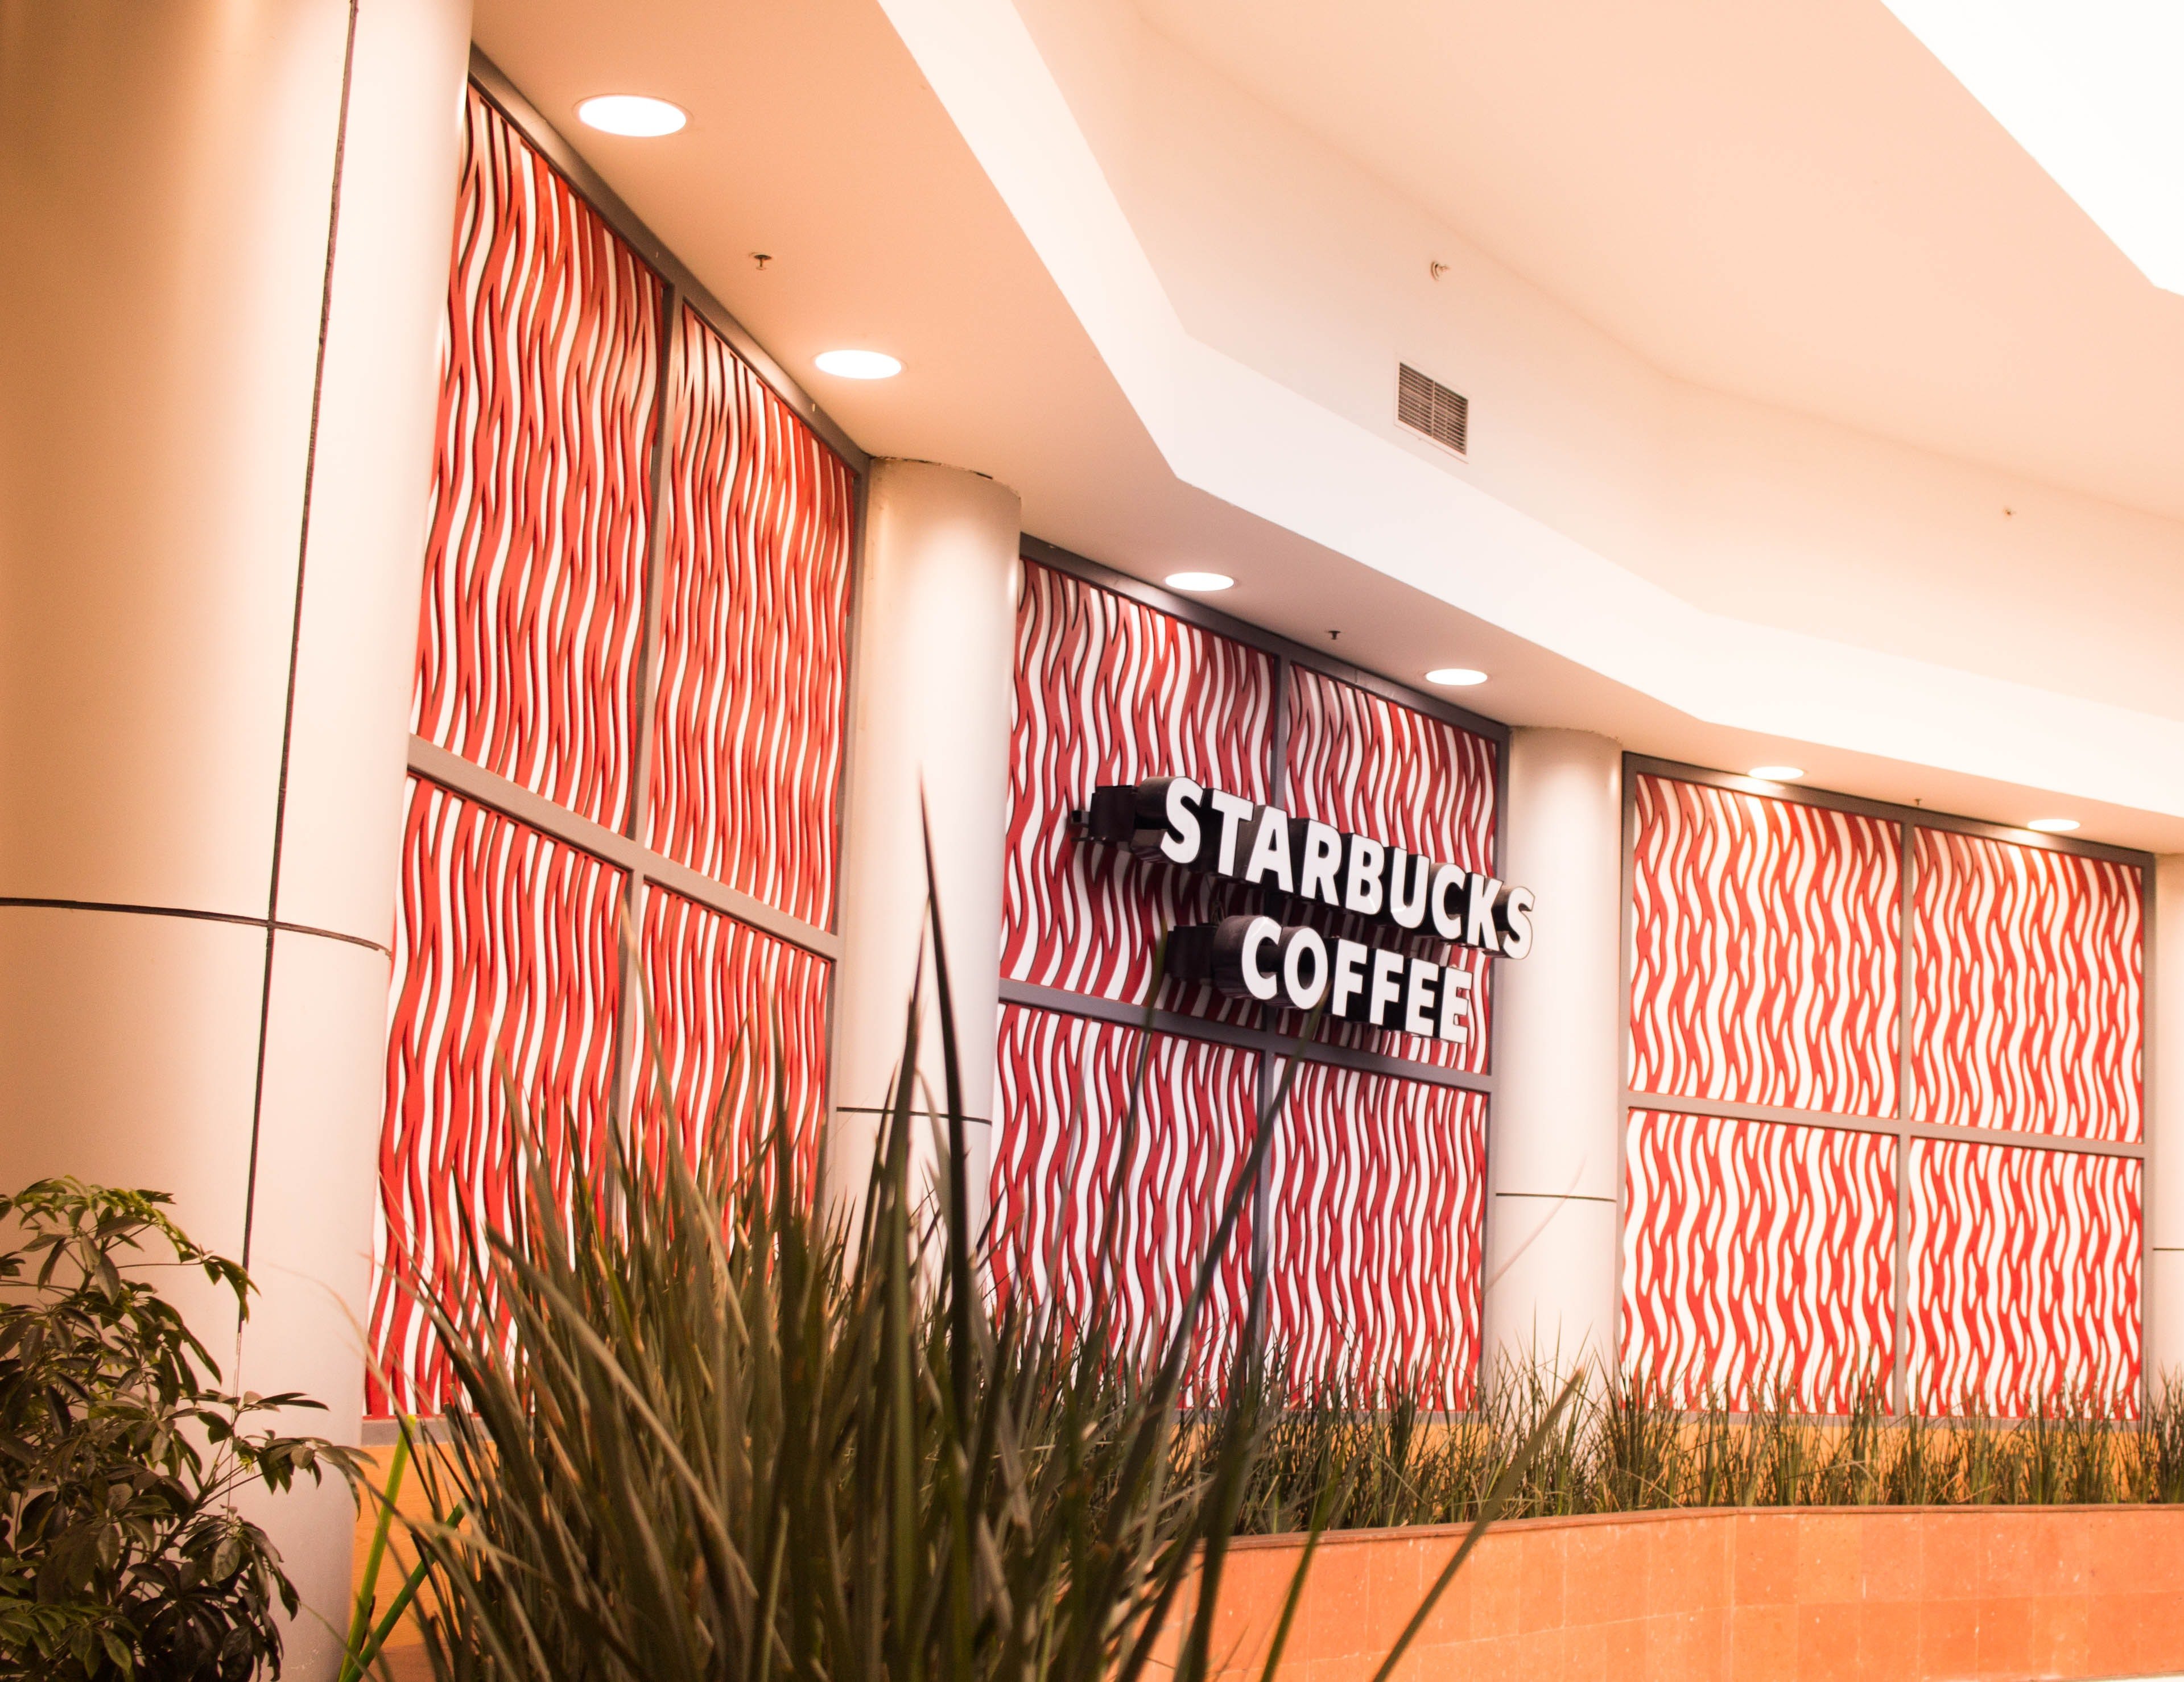 Starbucks branding can be seen on the side of one of their coffee shops | Photo: Pexels/David López 